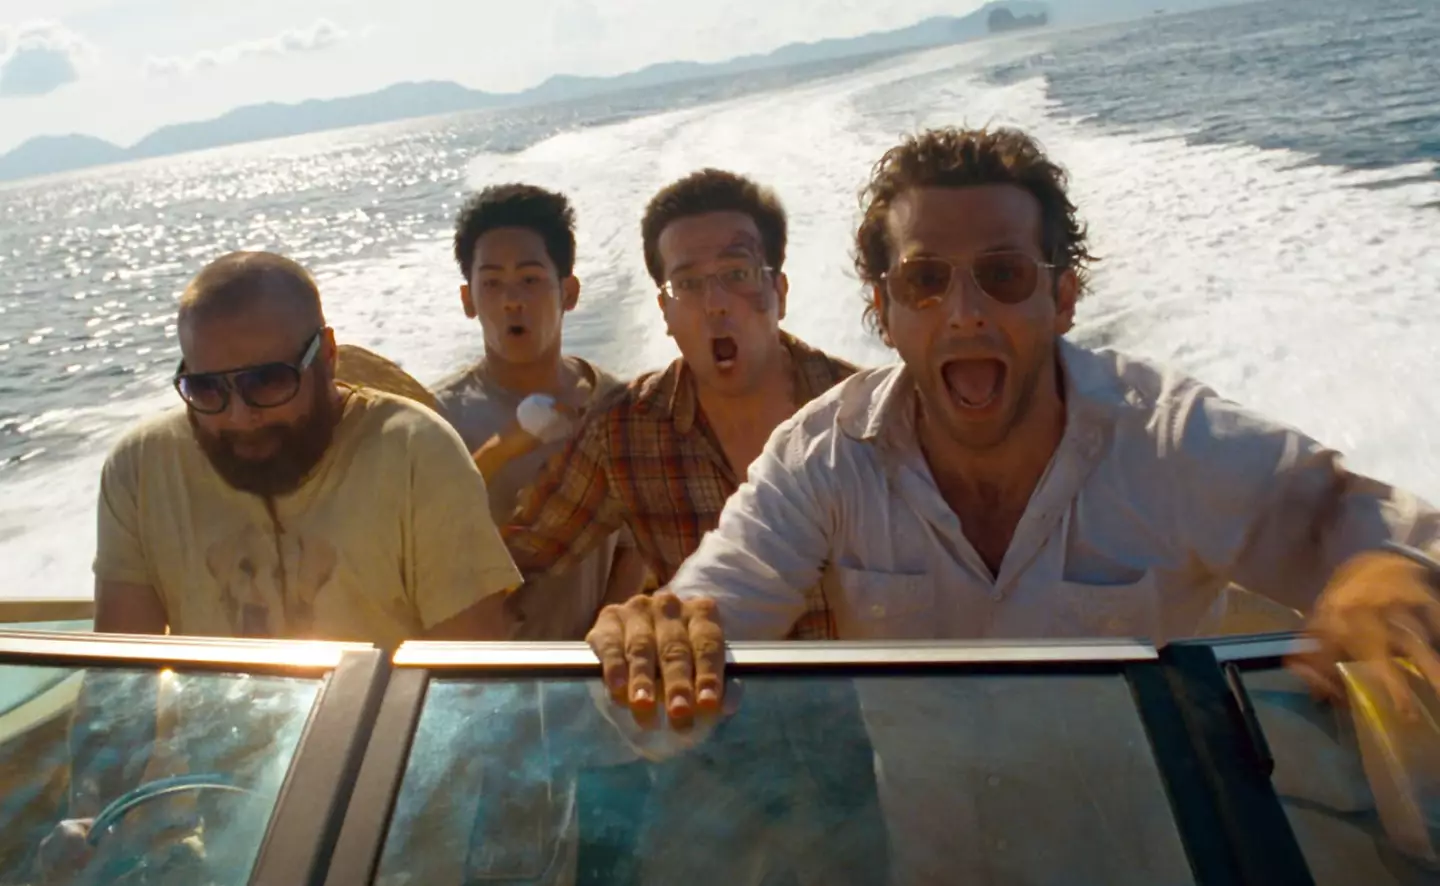 The Hangover 2 took us to Thailand.